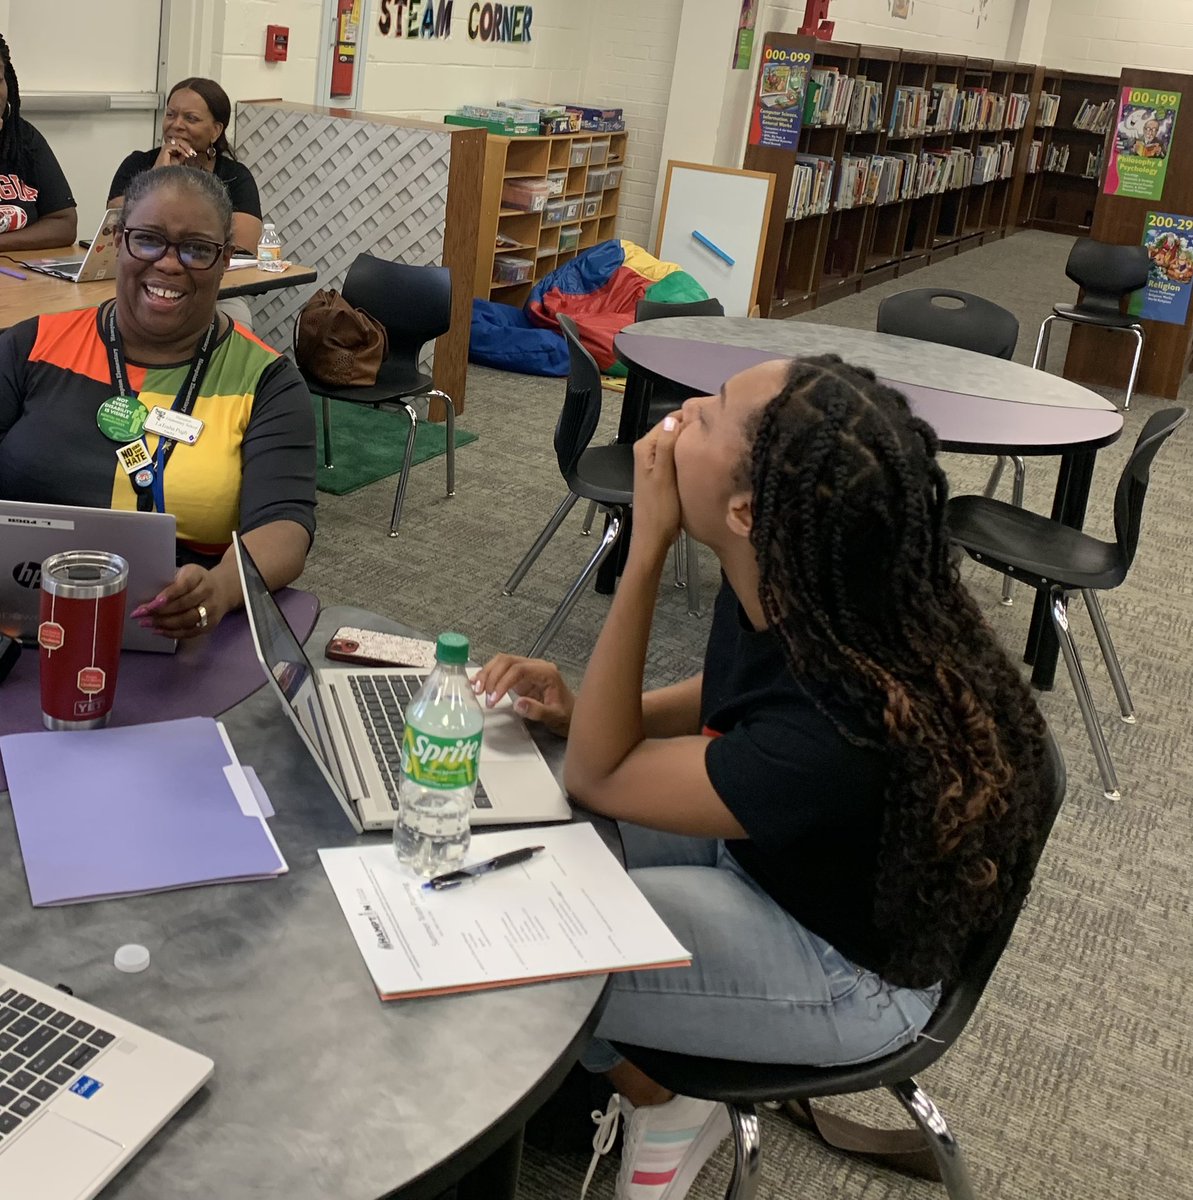 Our Leadership Team @HES_HCS did a fantastic job leading our summer “planning ahead” session. Teams were able to fellowship with their new members and collaborate to determine what week 1 will “look like.” Teamwork makes the dream work! @MichelleHill77 @st_johane @michellewil2